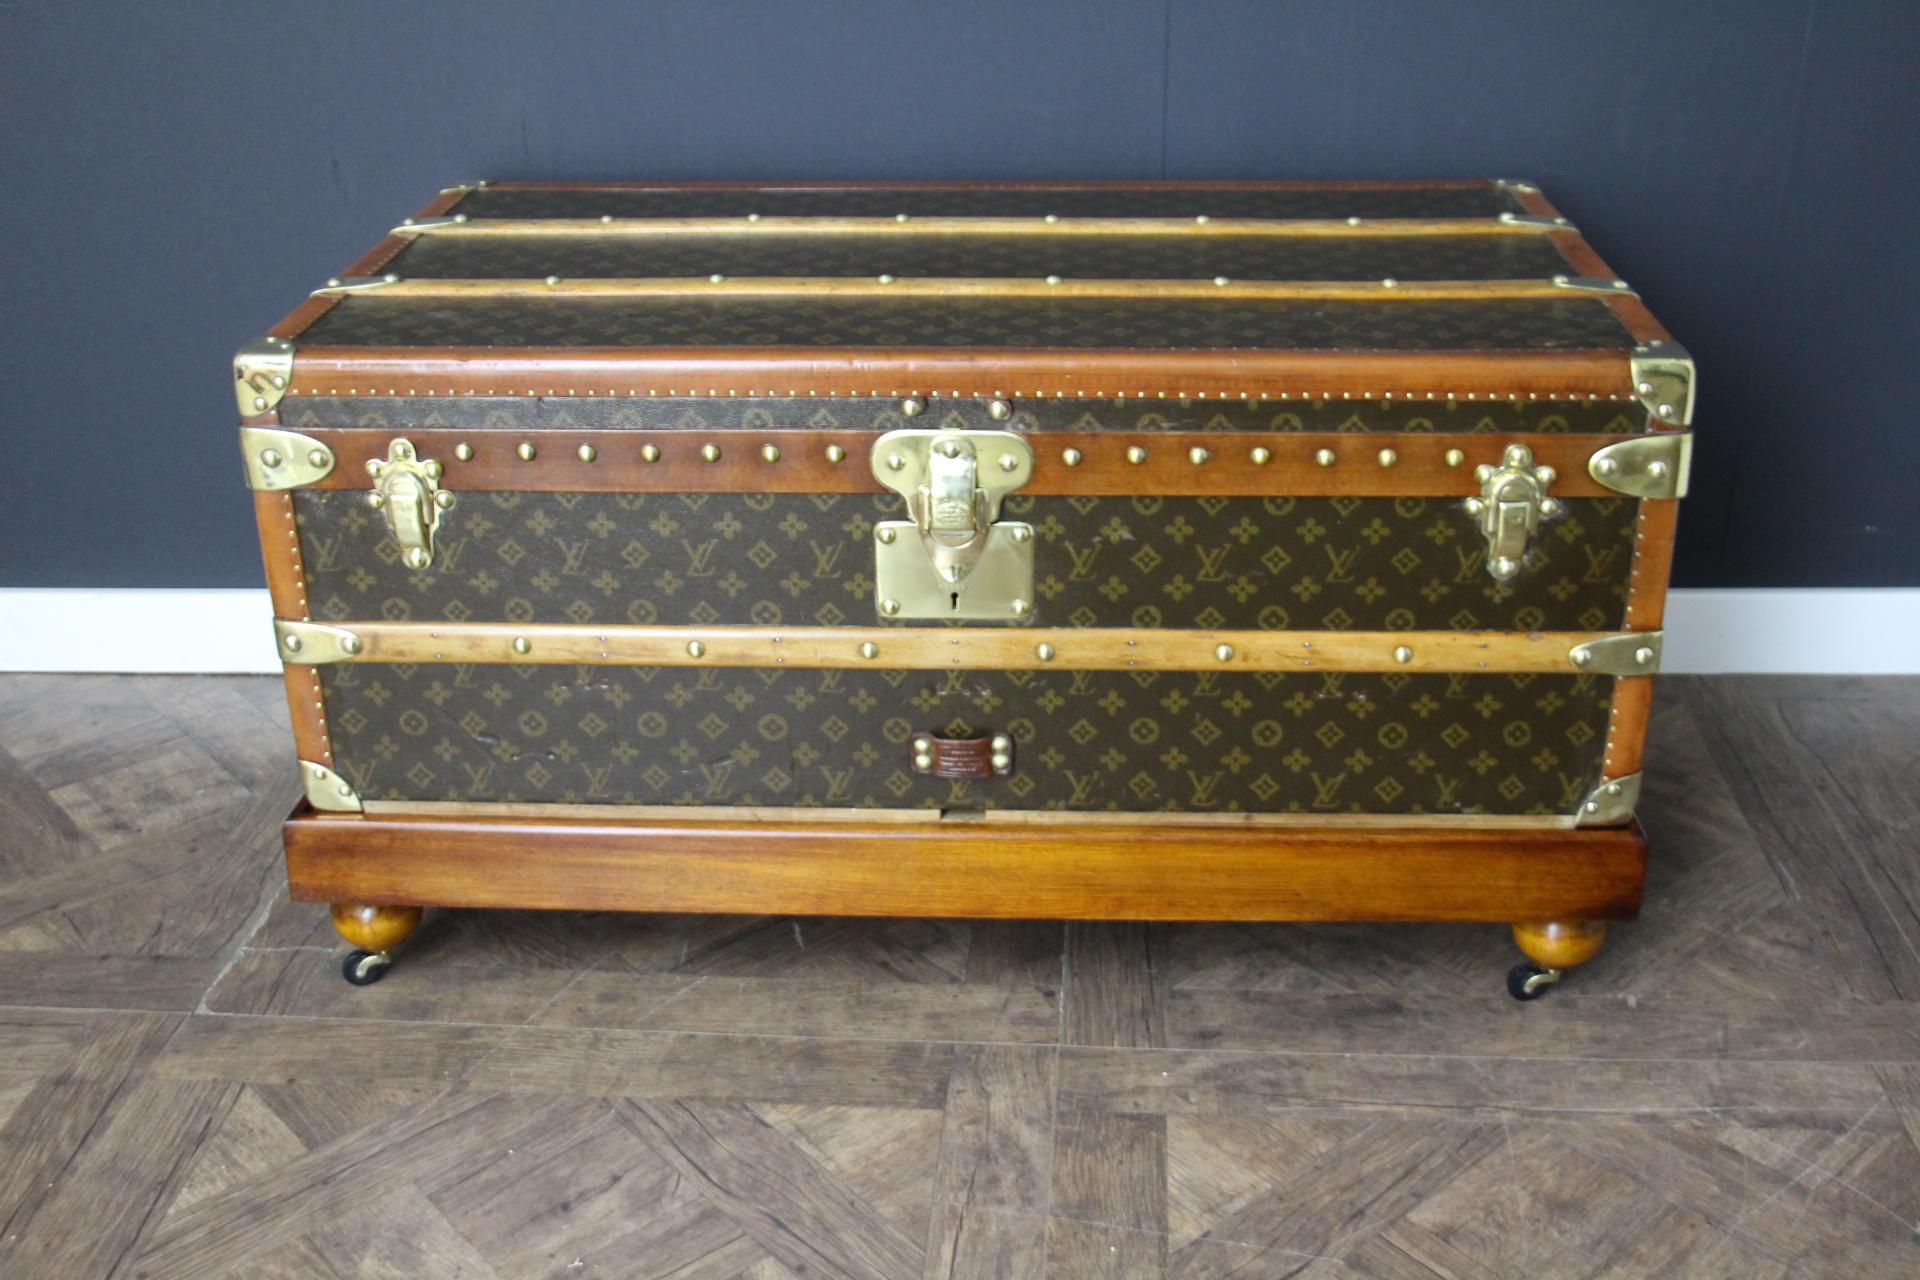 This very nice Louis Vuitton trunk features hand stenciled monogram canvas , light honey color lozine trim and Louis Vuitton stamped solid brass locks and clasps, Louis Vuitton stamped studs as well as large leather side handles. Its patina is warm